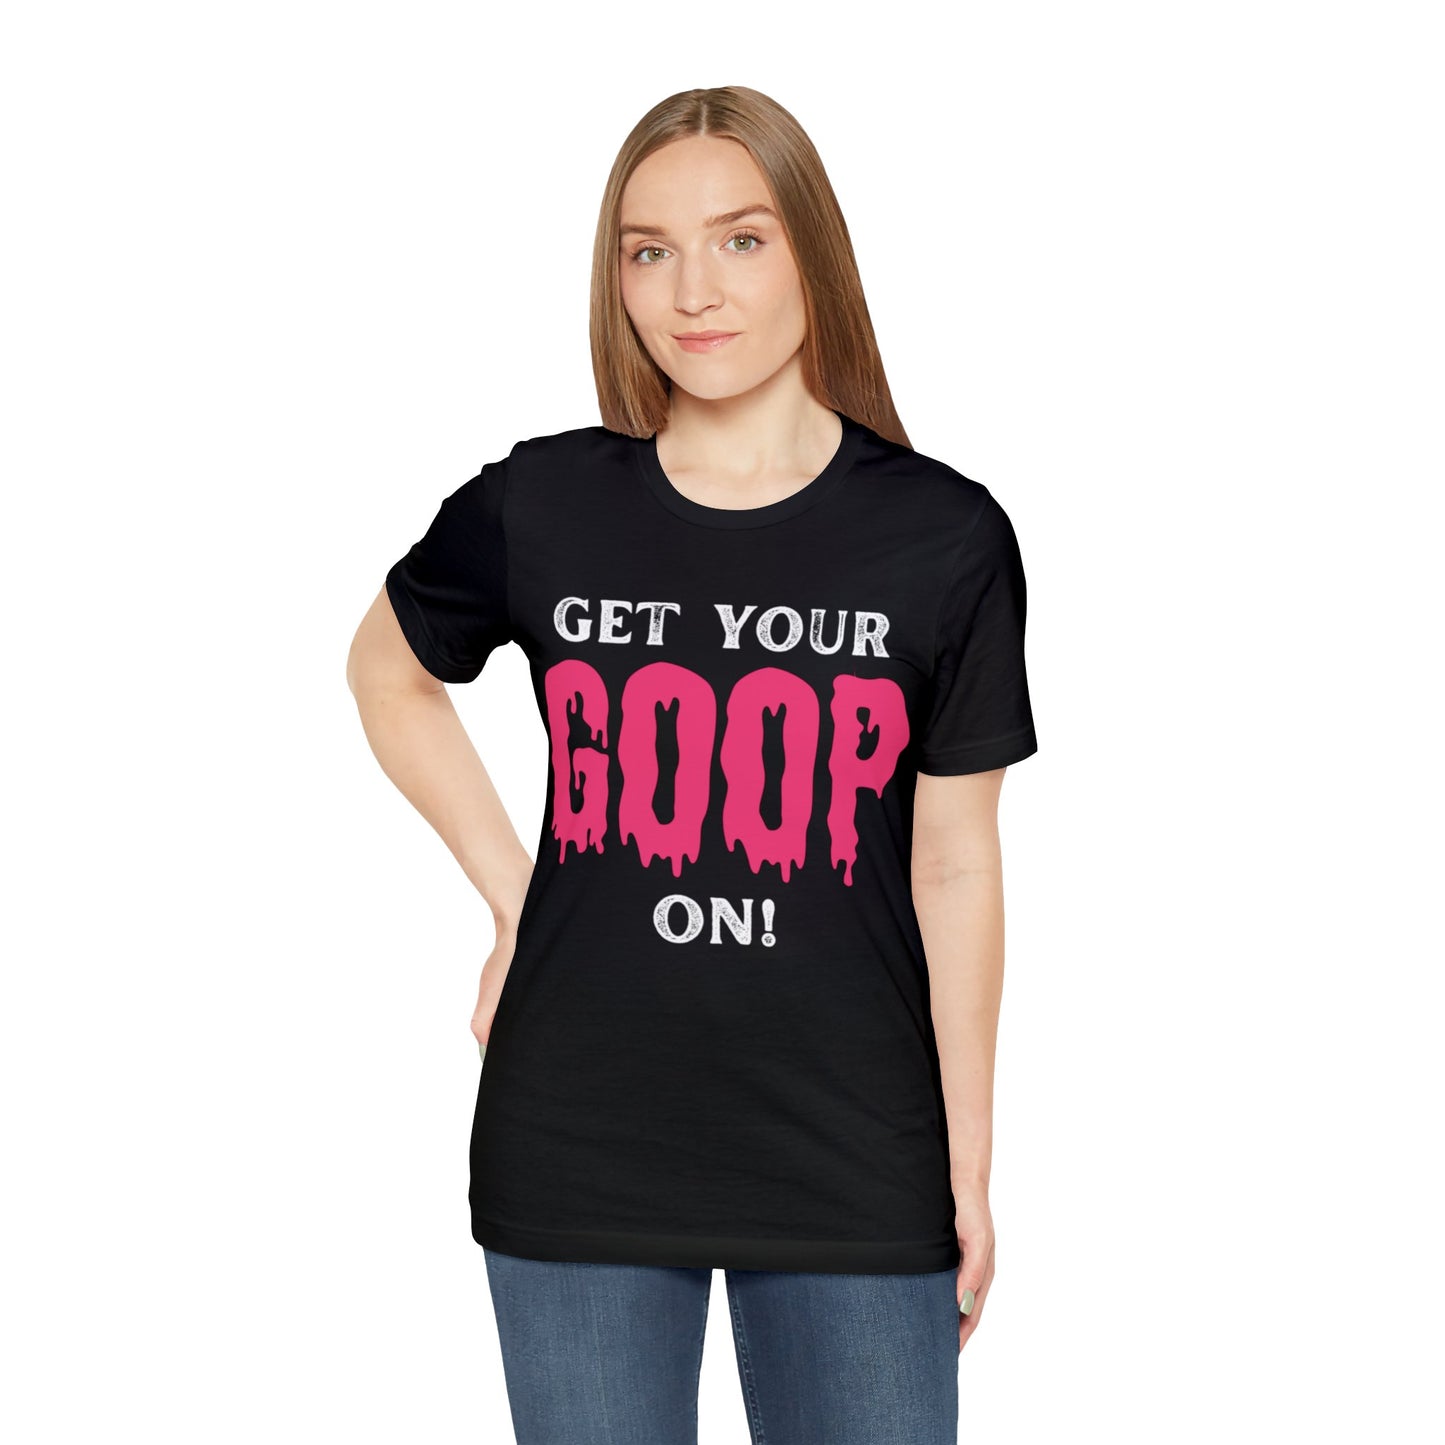 Get Your Goop On T-Shirt